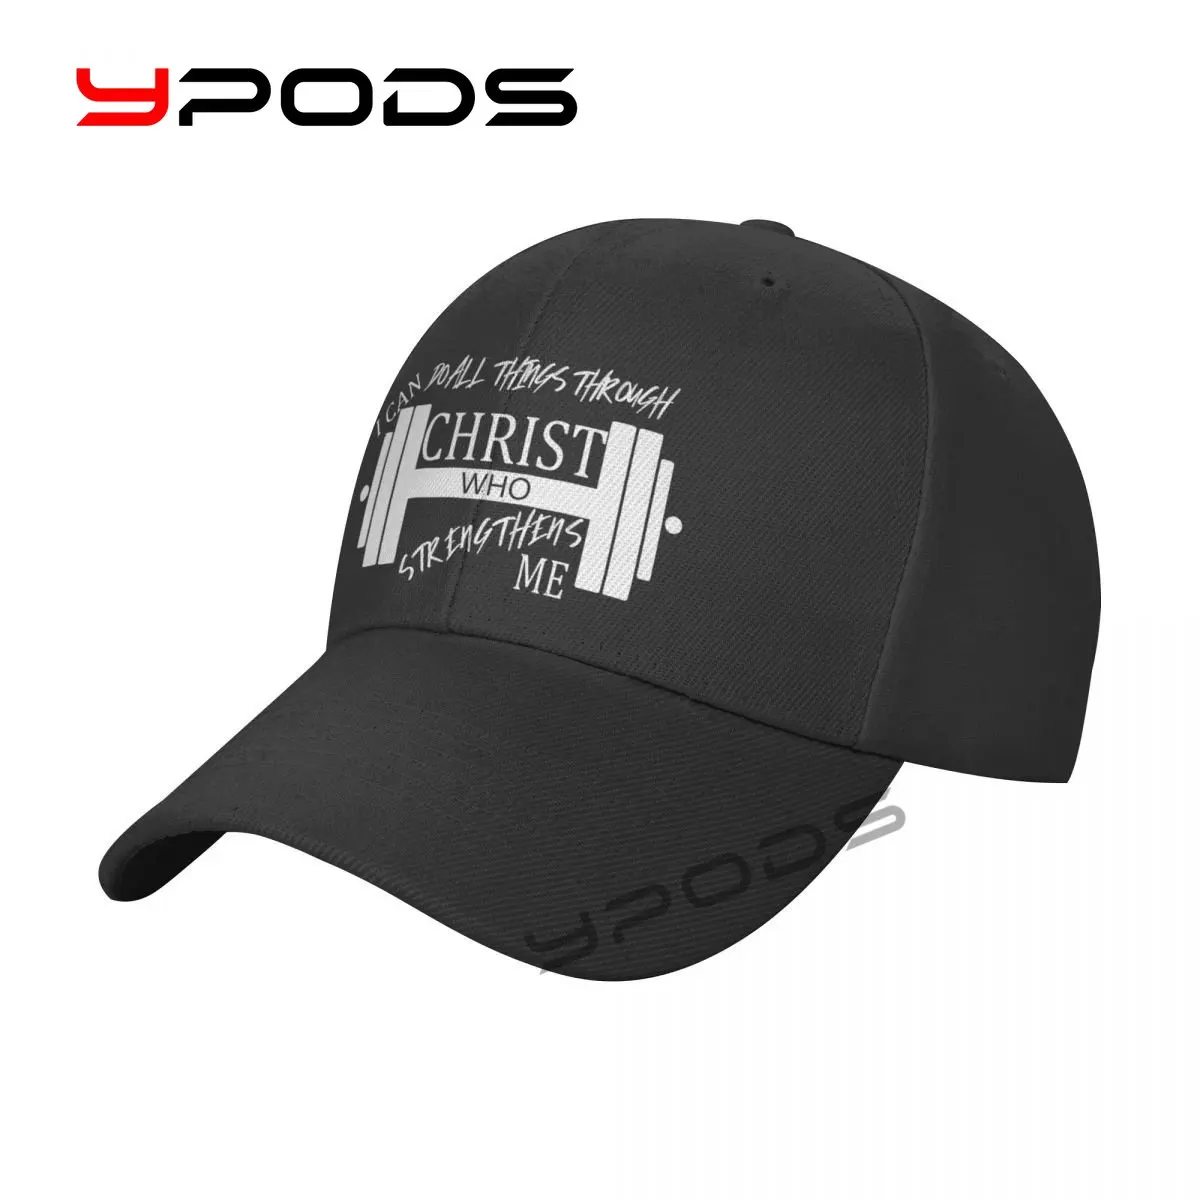 

I Can Do All Things Through Christ Who Strengthens Me New Baseball Caps for Men Cap Women Hat Snapback Casual Cap Casquette hats